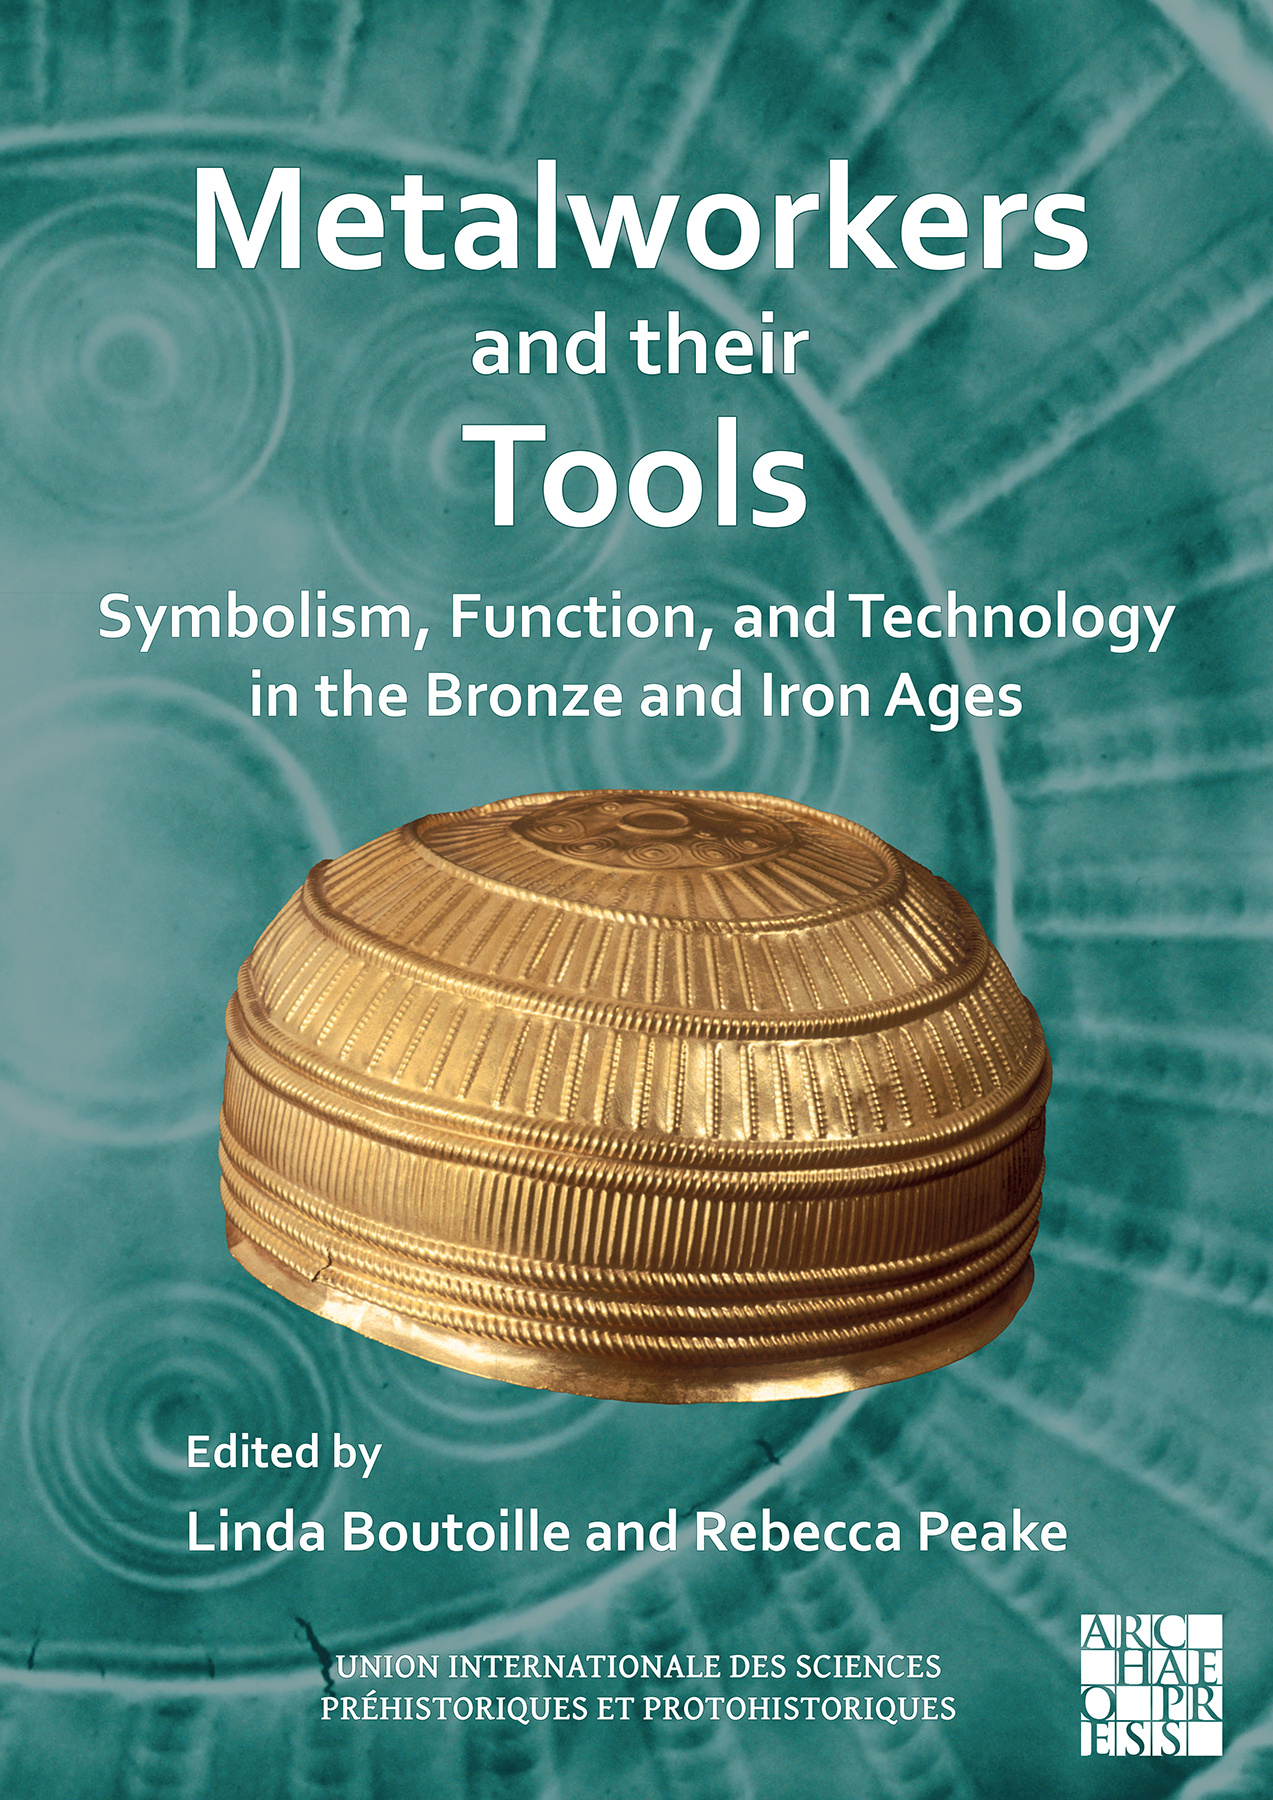 Metalworkers and their Tools. Symbolism, Function, and Technology in the Bronze and Iron Ages, 2023, 186 p.